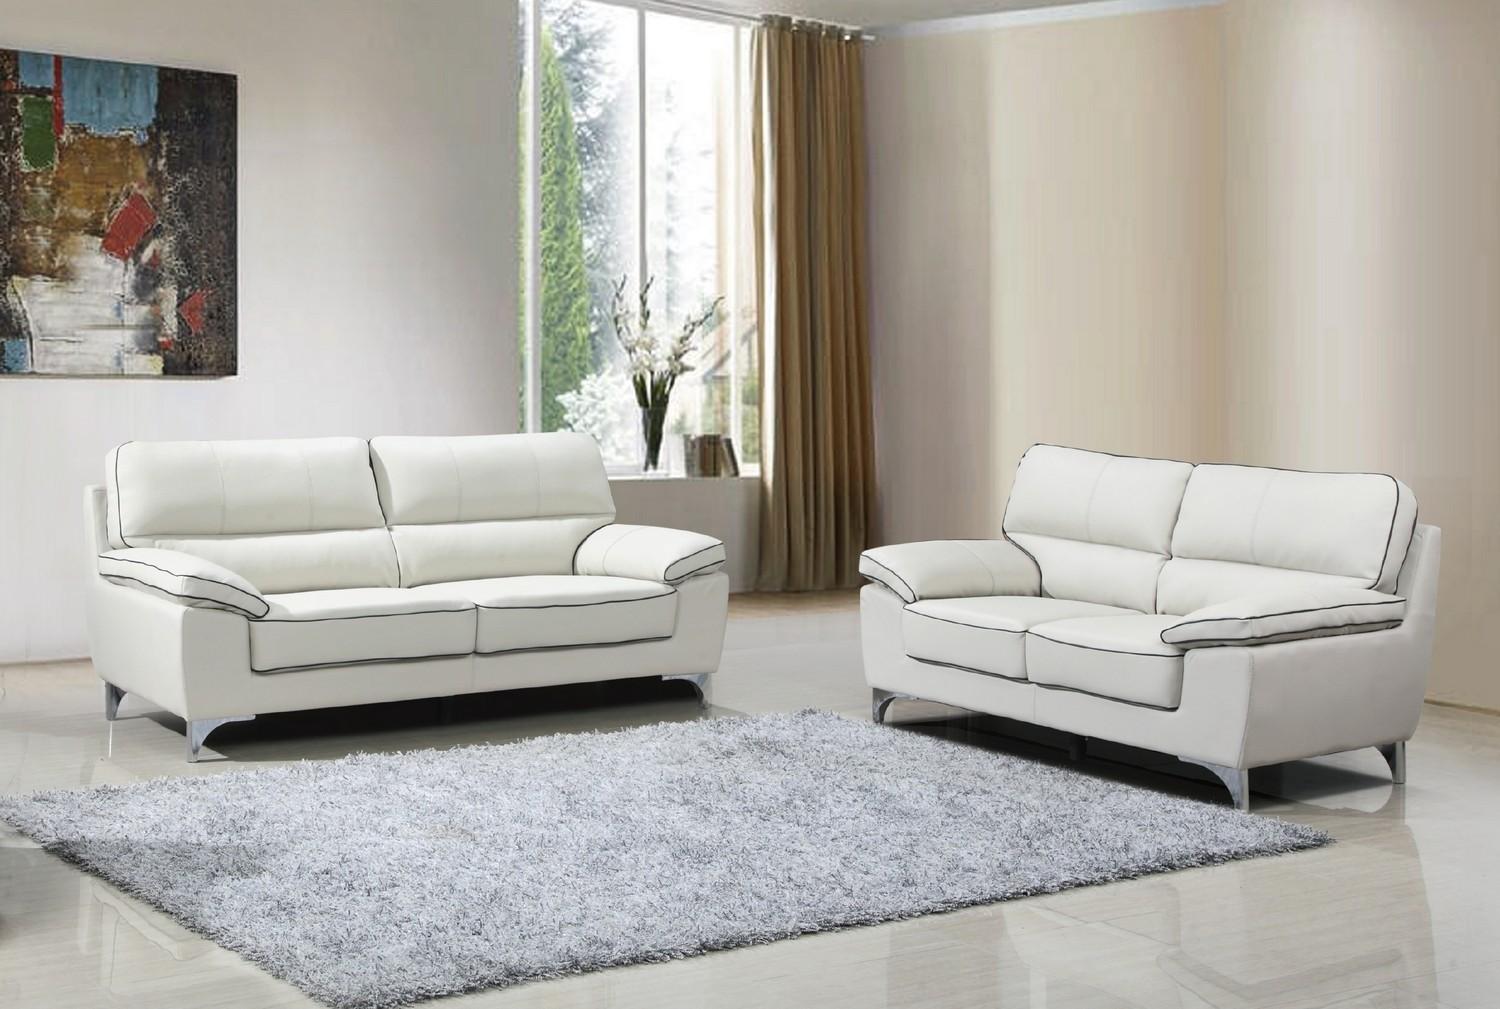 Contemporary Sofa and Loveseat Set 9436 9436-LIGHT-GRAY-2PC in Light Gray Leather gel match